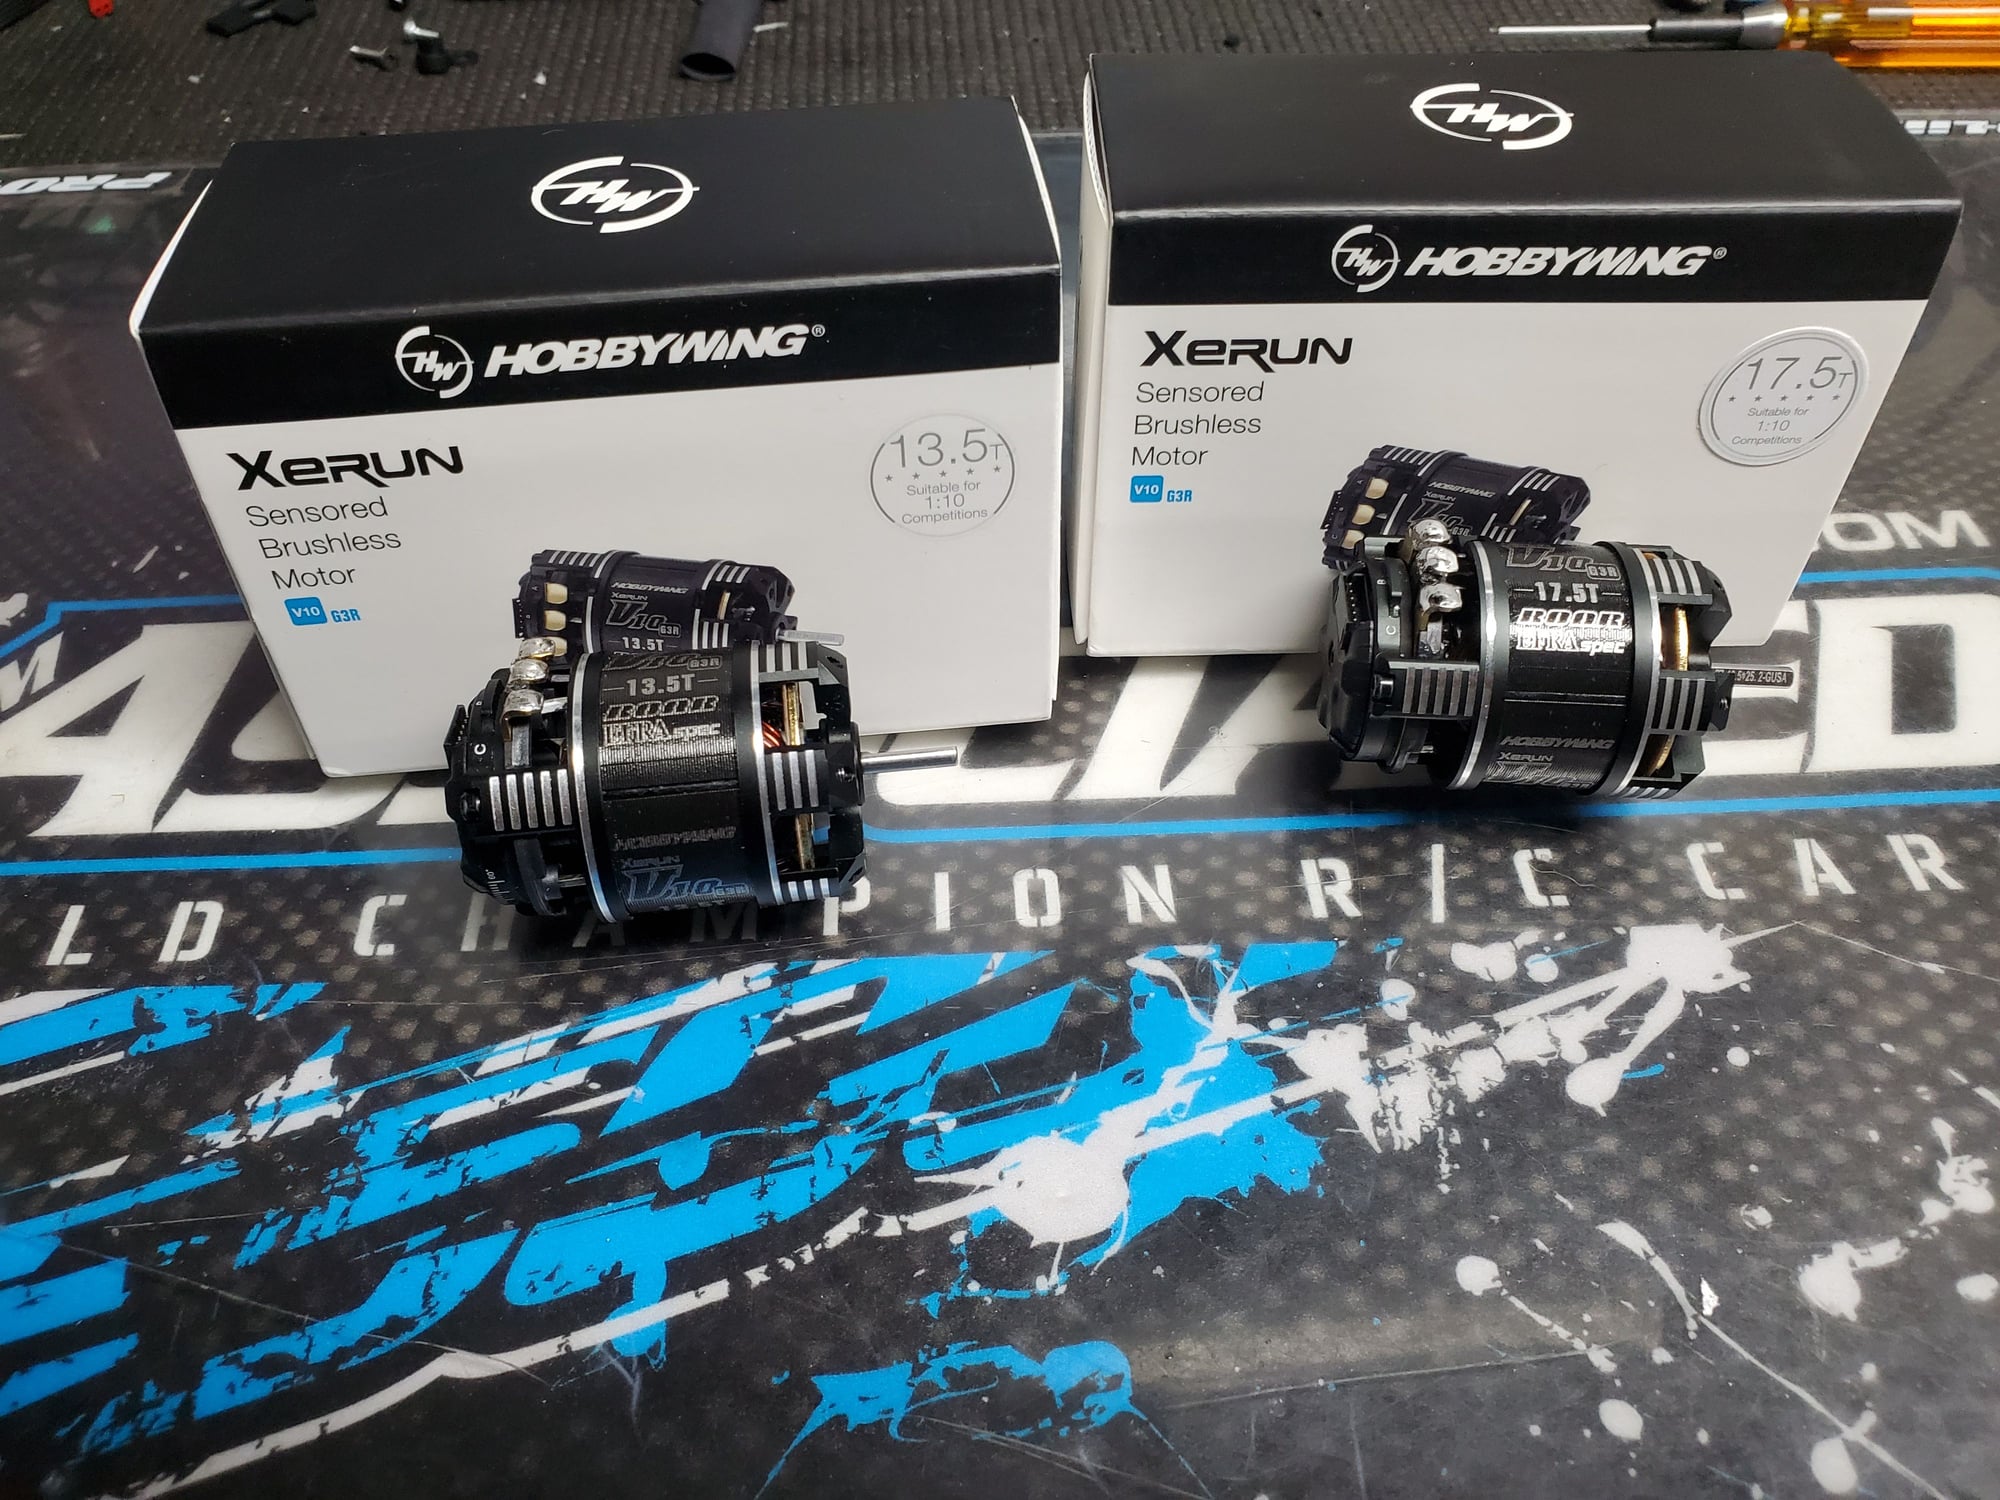 Hobbywing G3r motors 13.5 and 17.5 for sale - R/C Tech Forums